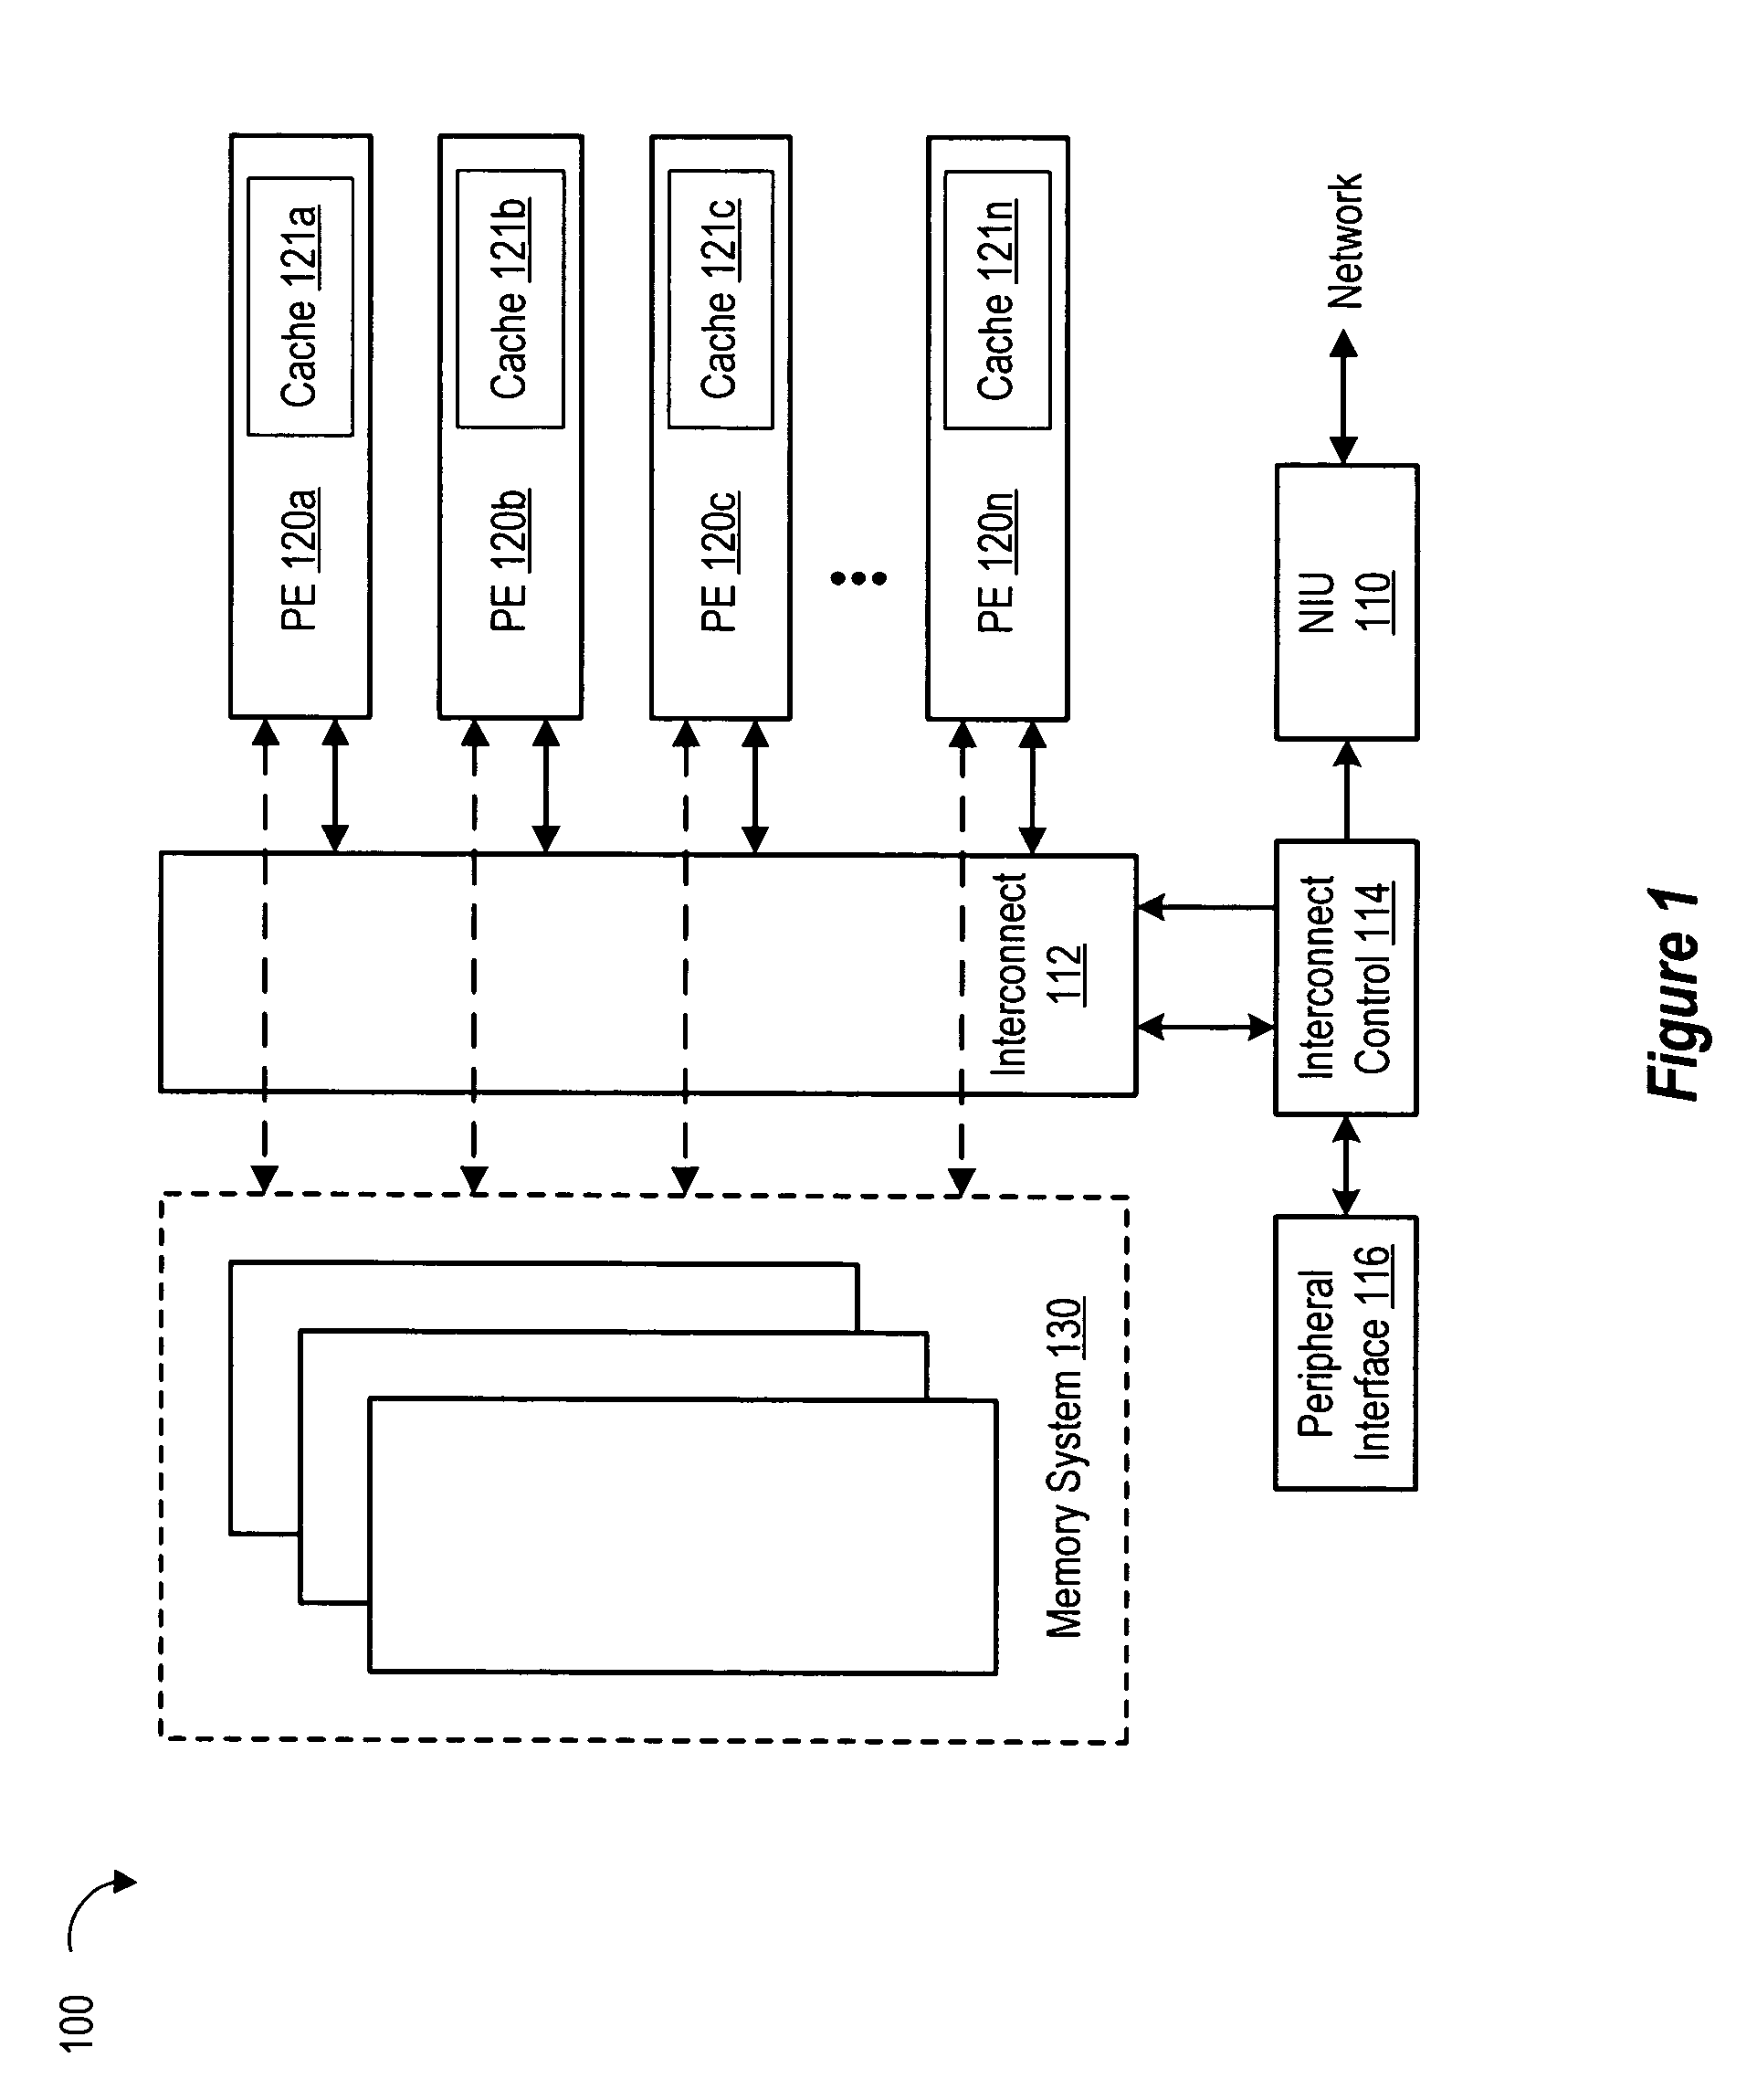 Network system including packet classification for partitioned resources